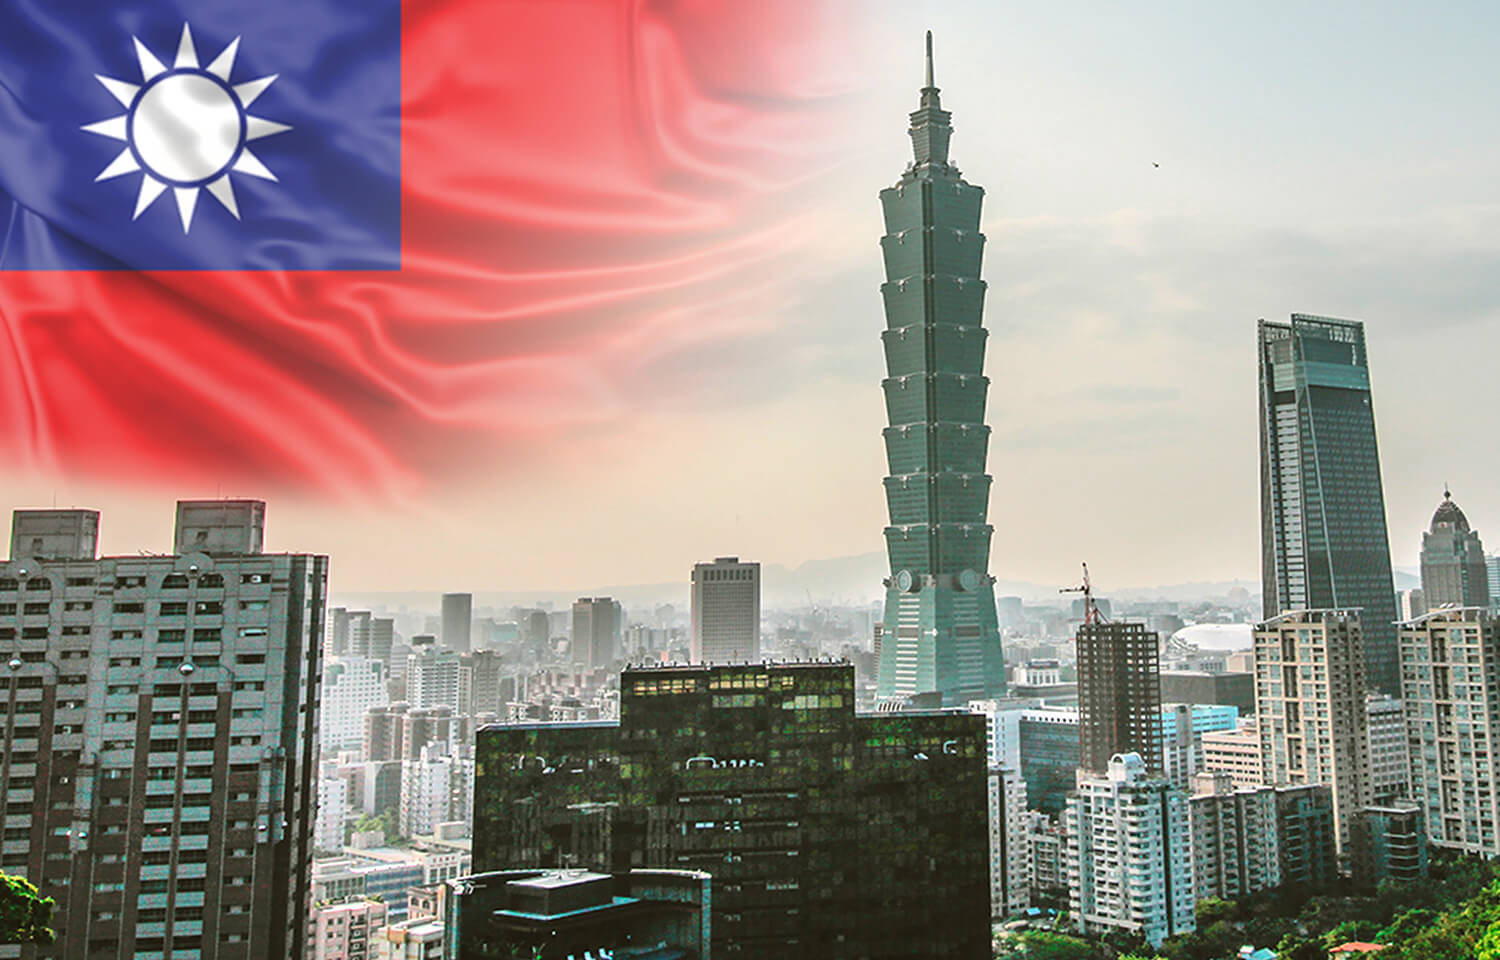 What Languages Are Spoken in Taiwan?